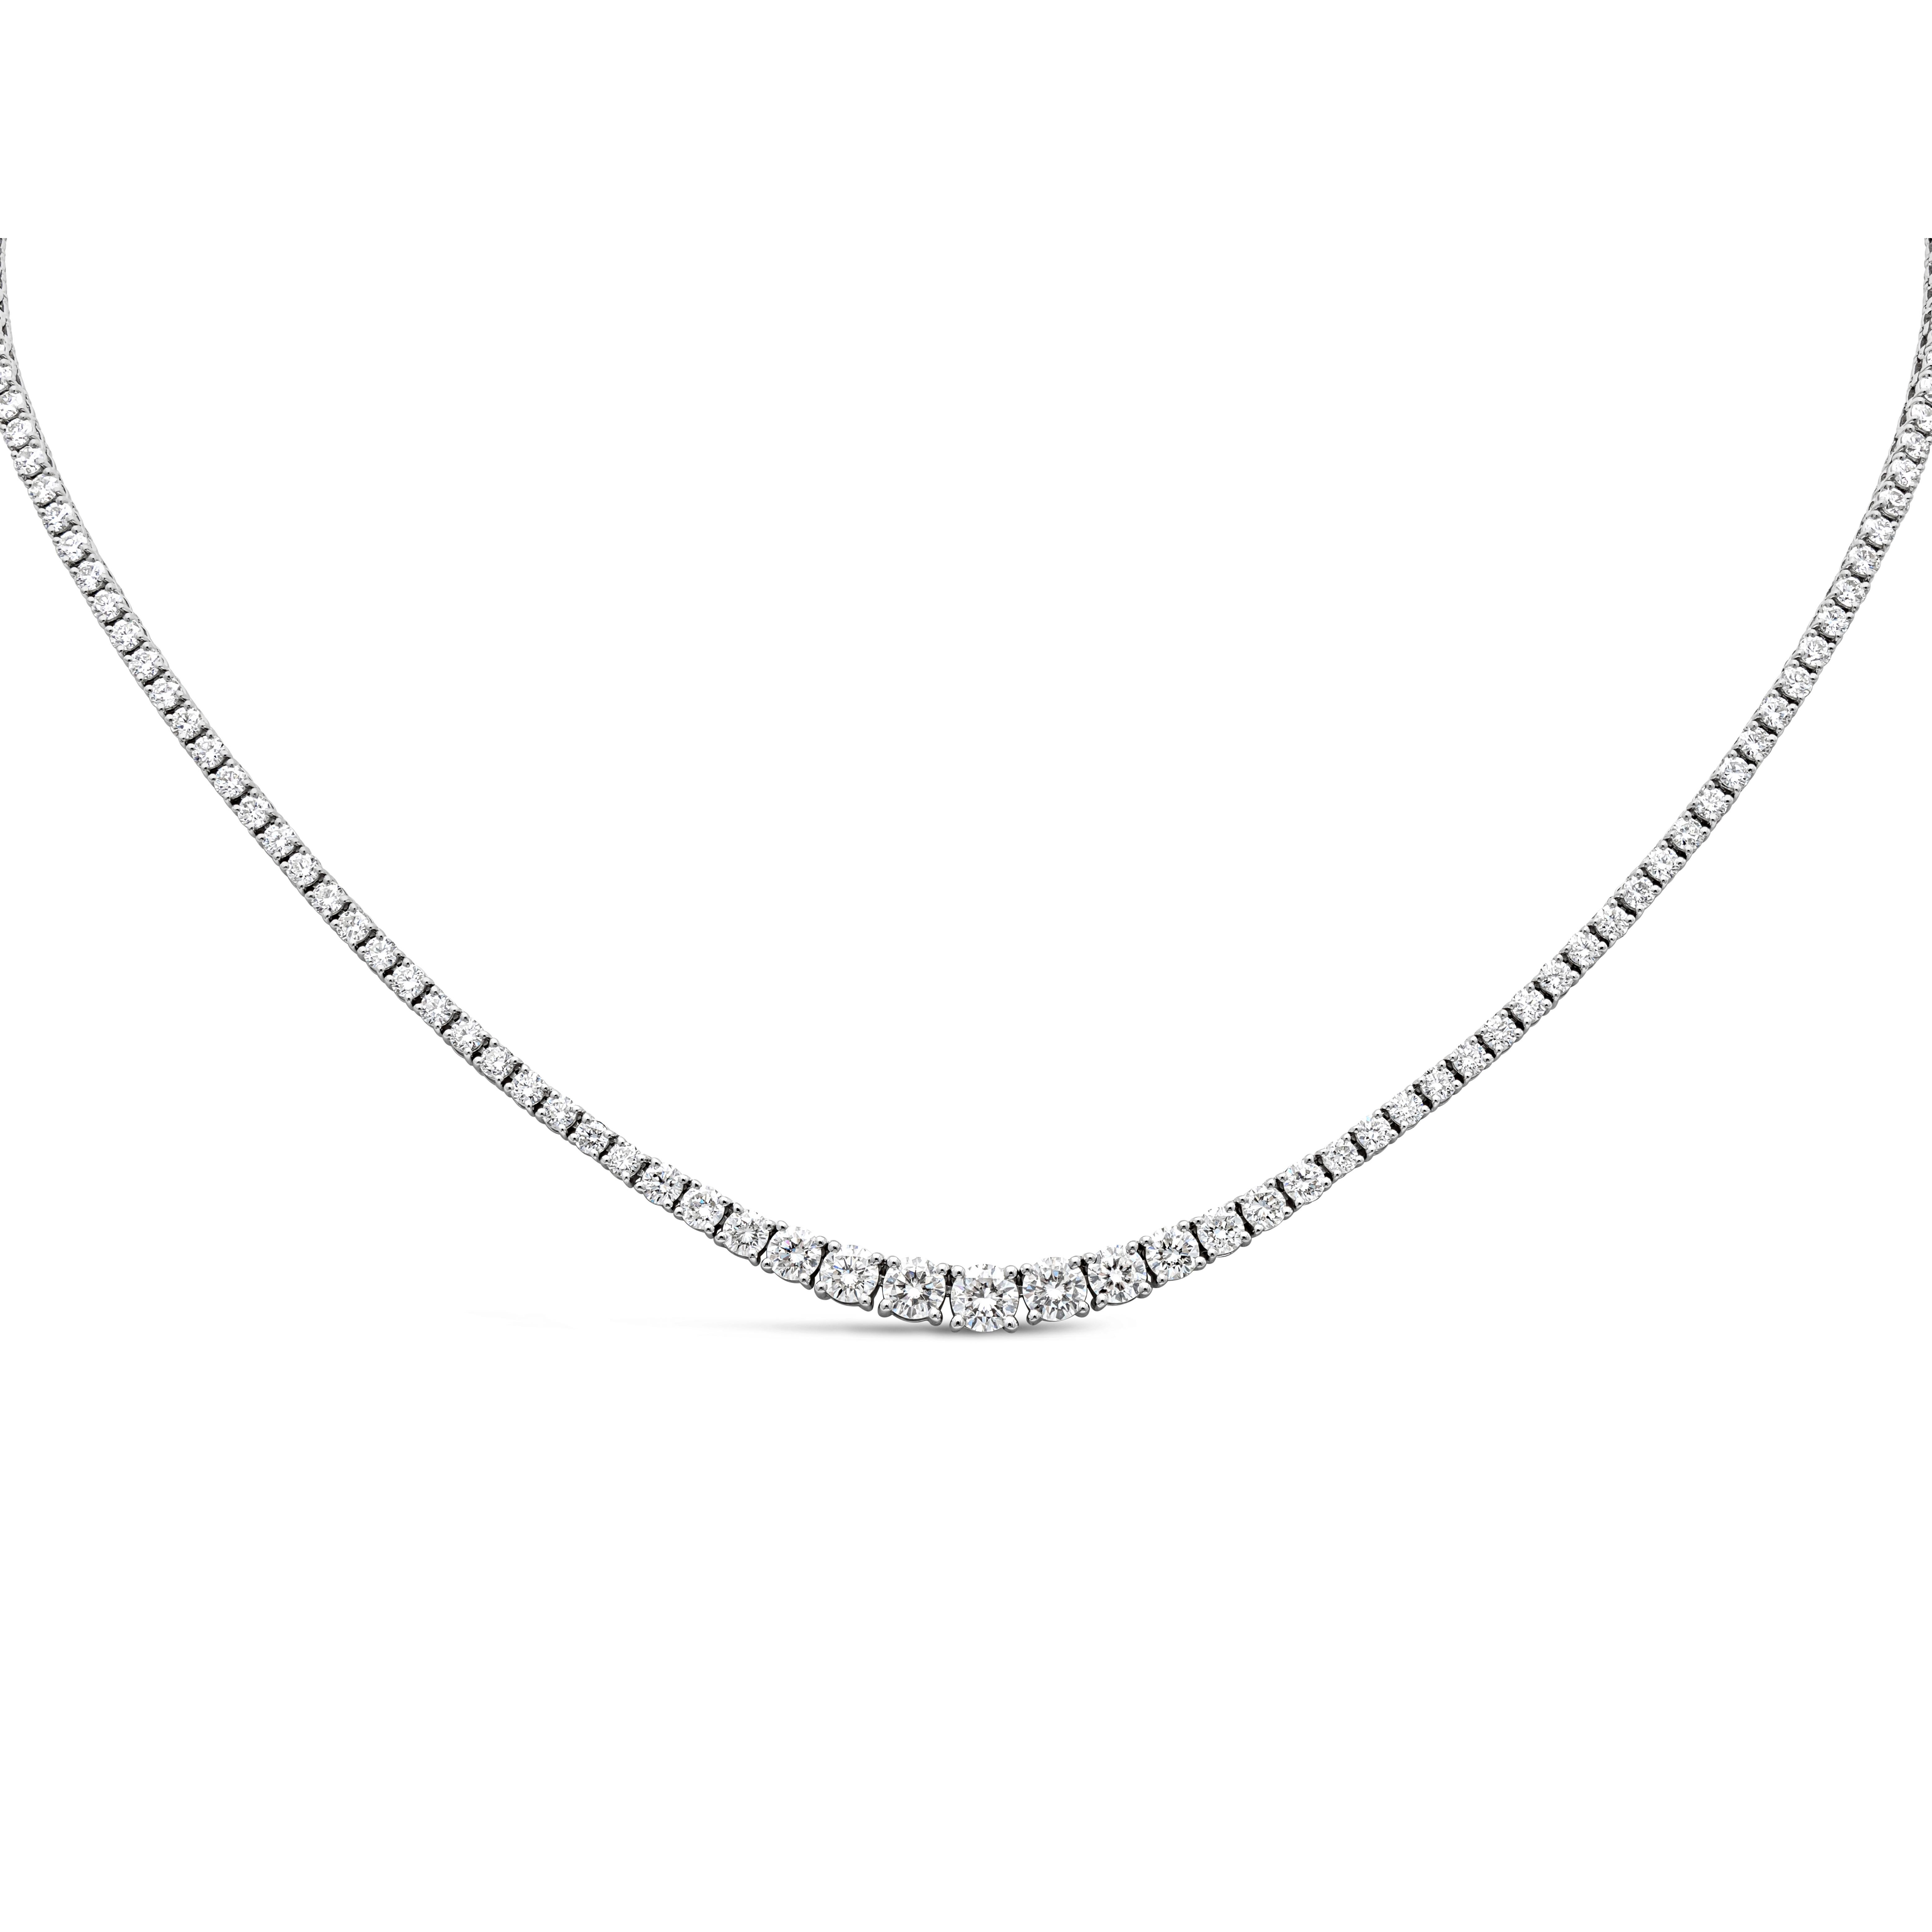 A brilliant and classic piece of jewelry showcasing a line of round brilliant diamonds that elegantly get larger to the center of the necklace. Brilliant round diamond weigh 5.16 carats, largest diamond at the center weighs 1.09 carats GH Color and